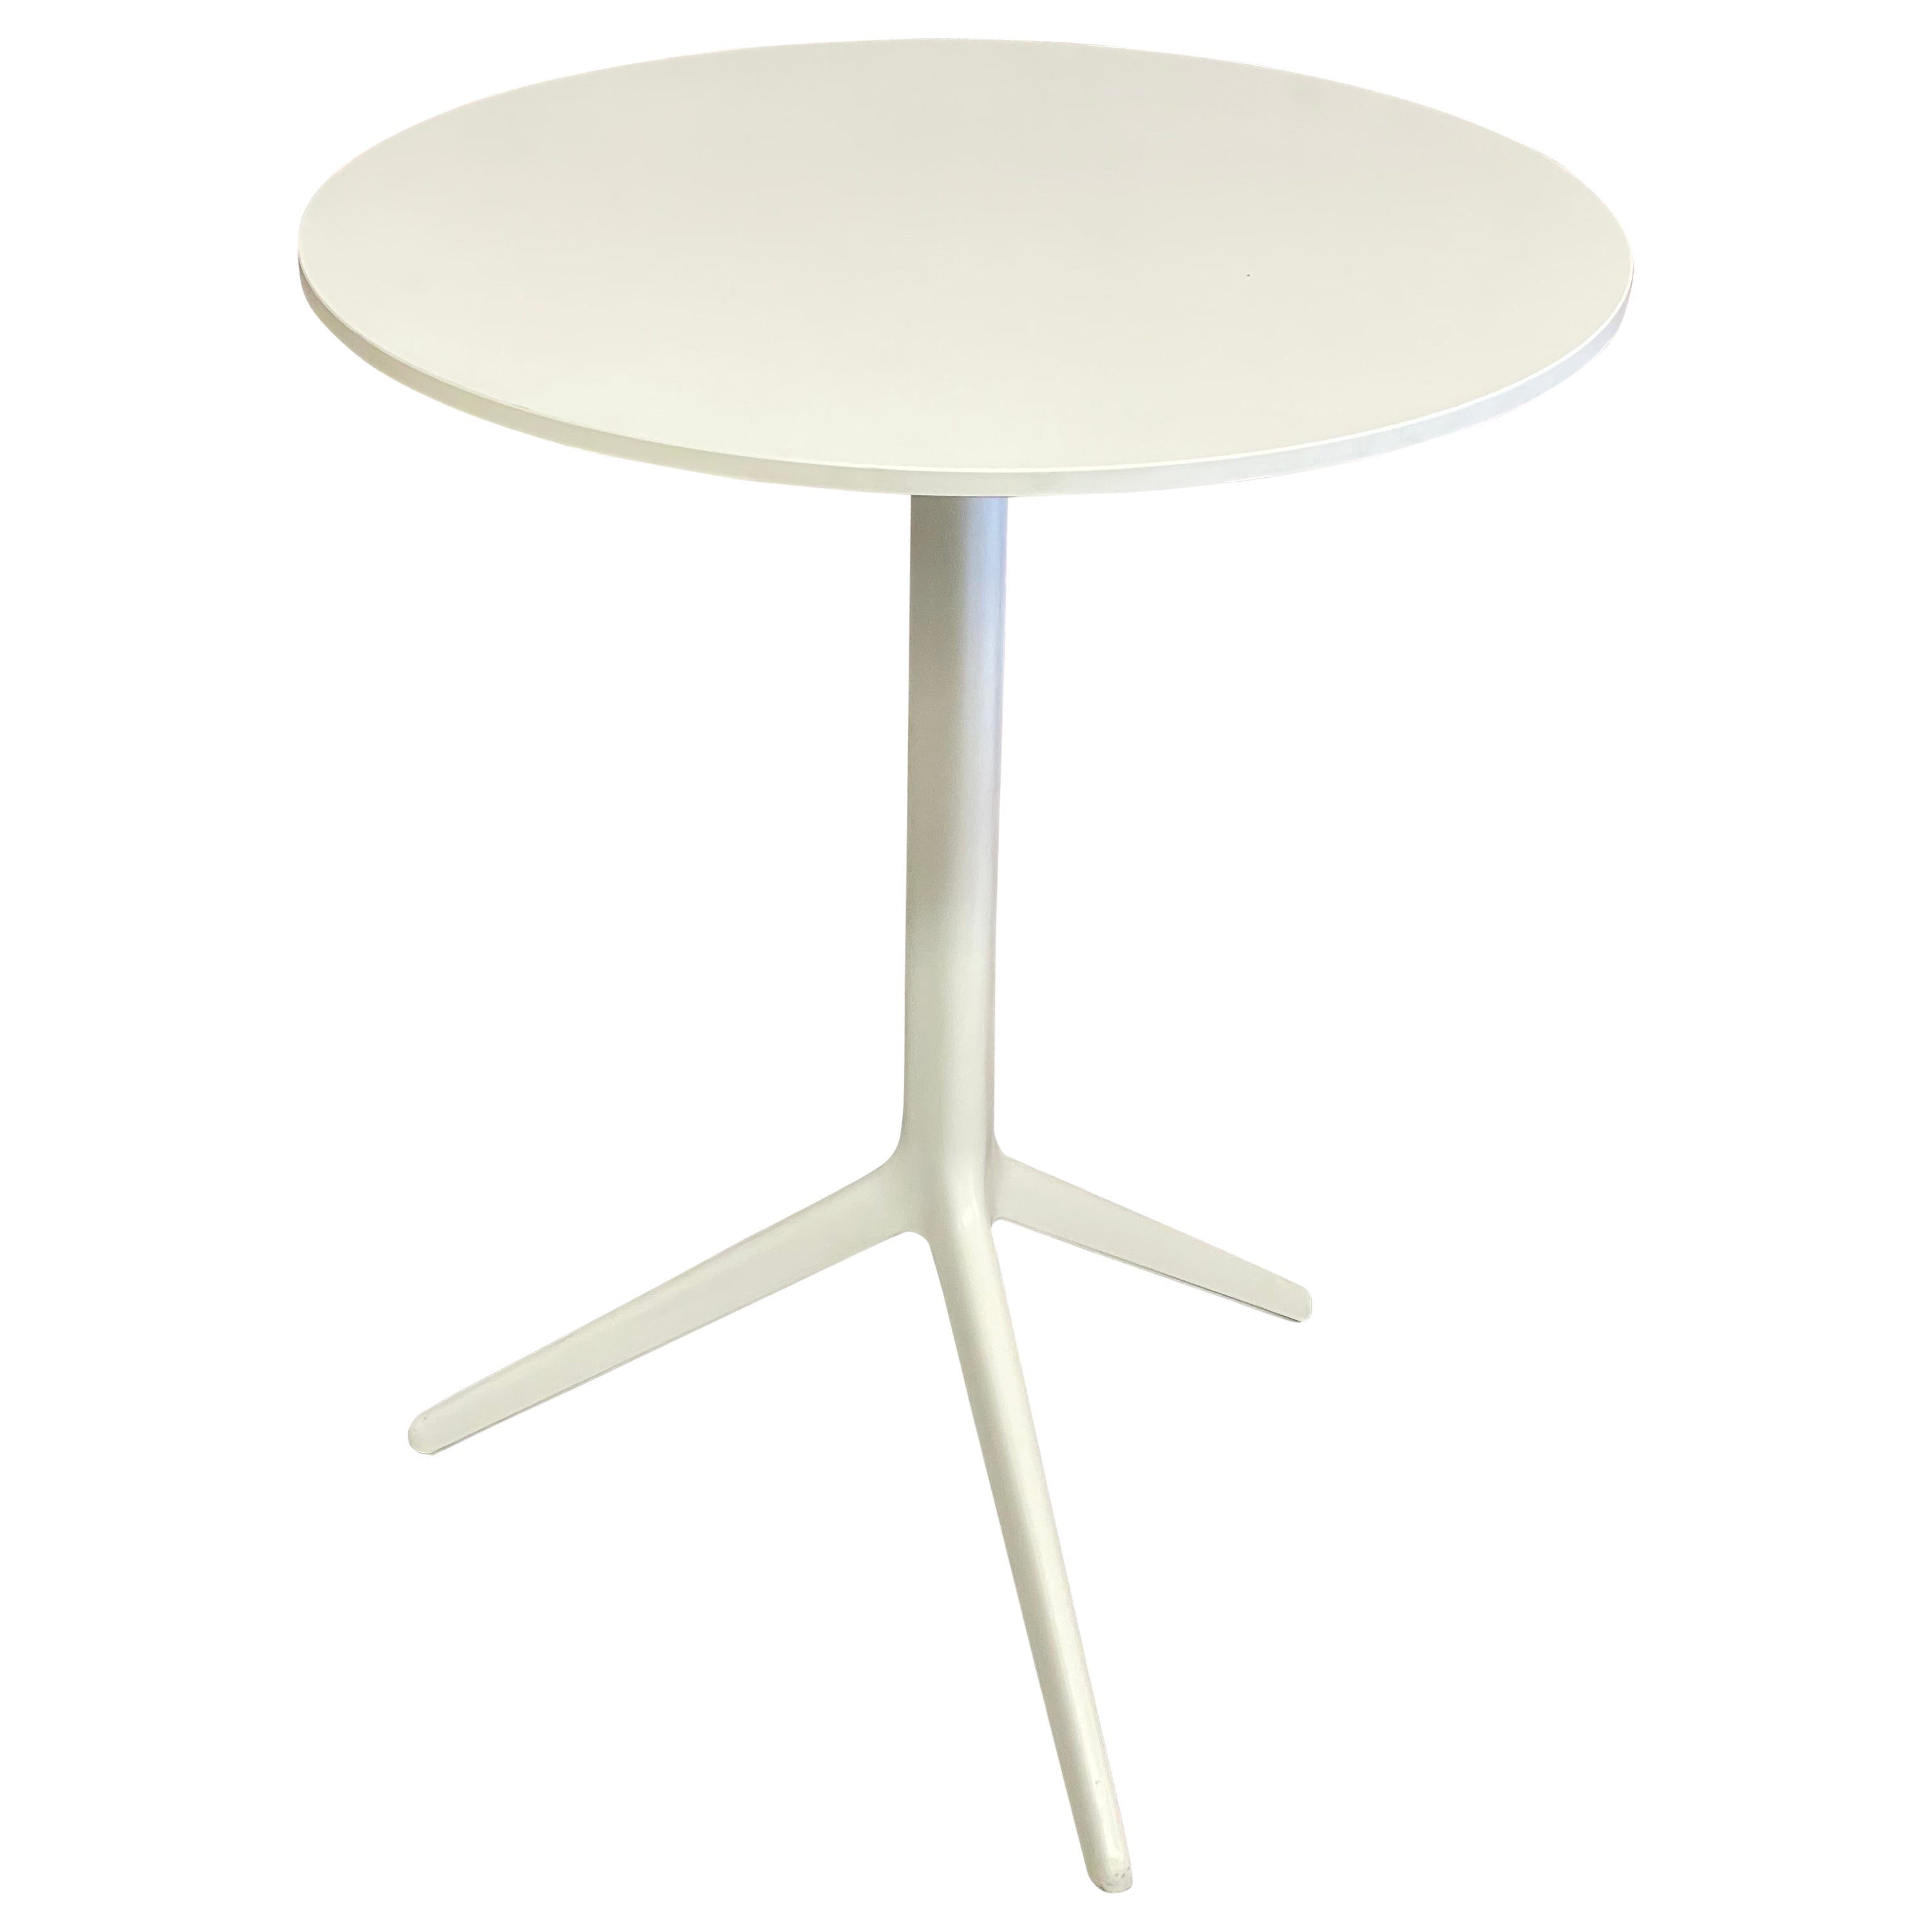 Central "Flip" Table in White by Ronan and Erwan Bouroullec for Magis For Sale